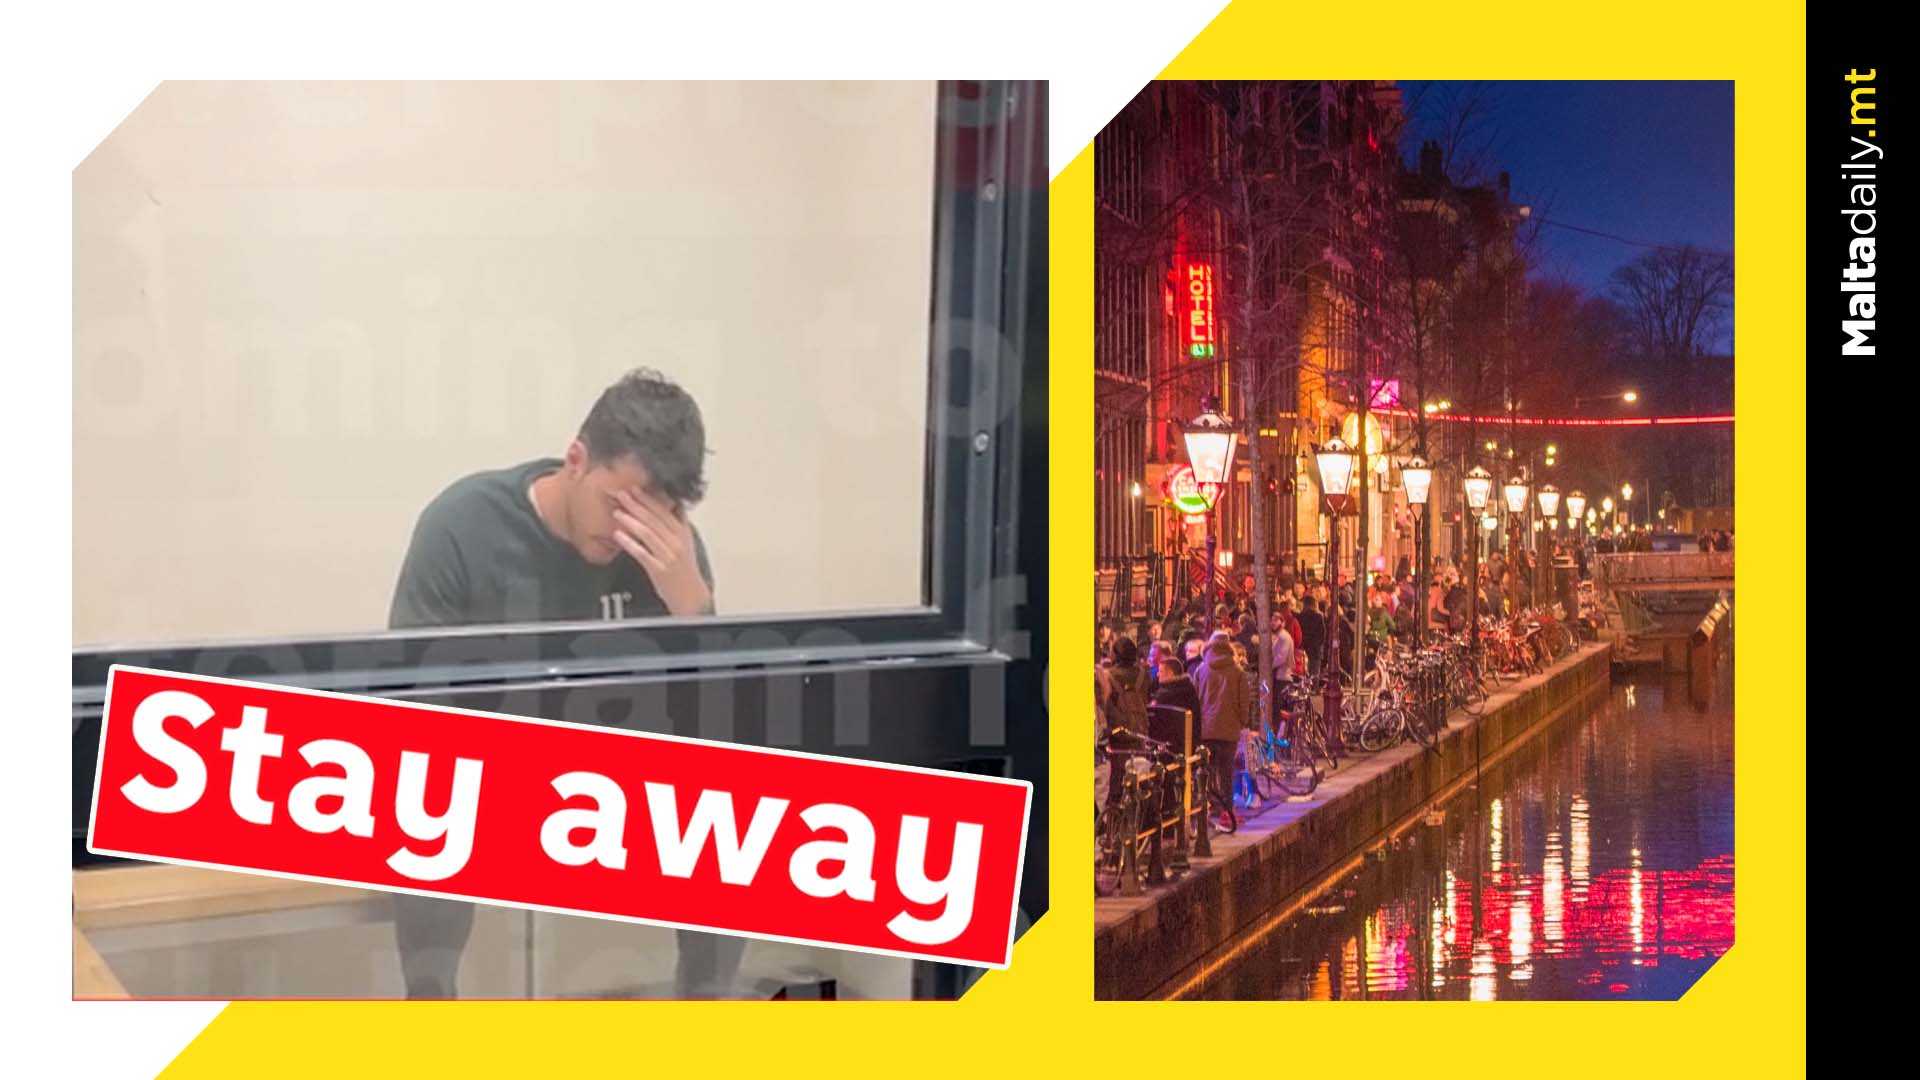 Amsterdam warns young British men looking for 'messy night's to stay away